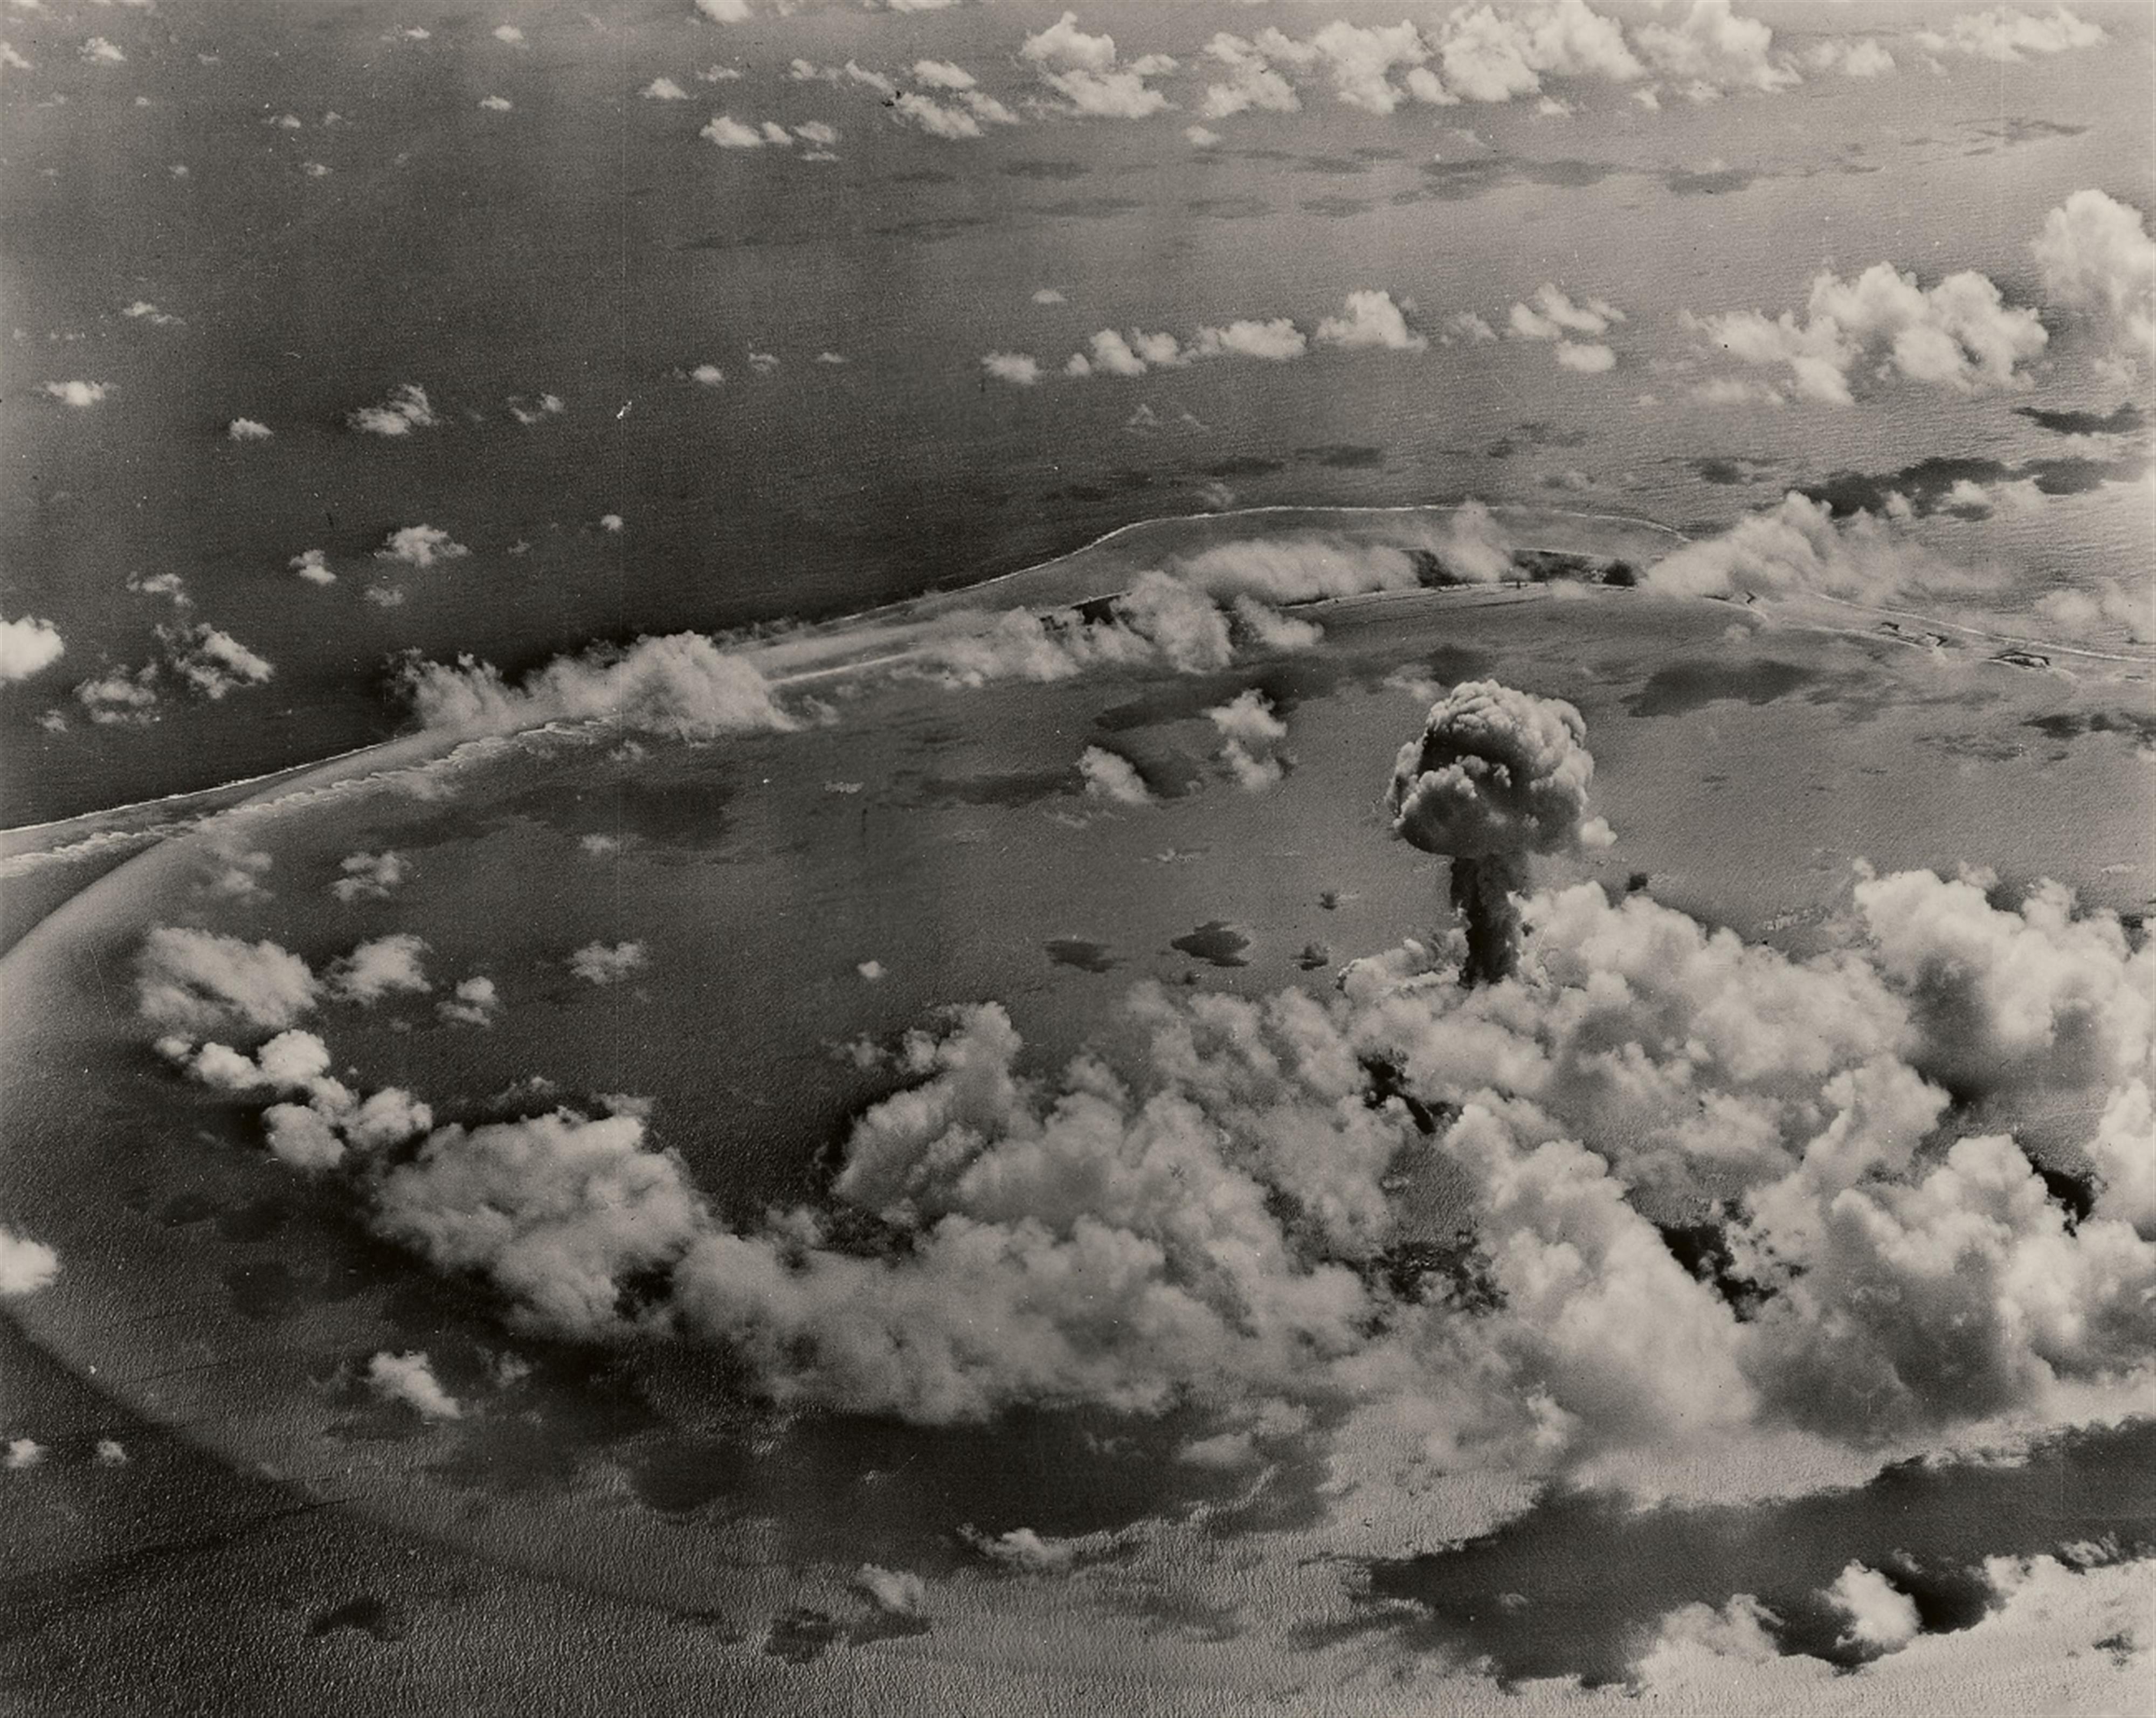 Joint Army Task Force One Photo - "Operation Crossroads" - Views of the Bikini Atoll nuclear Tests - image-4